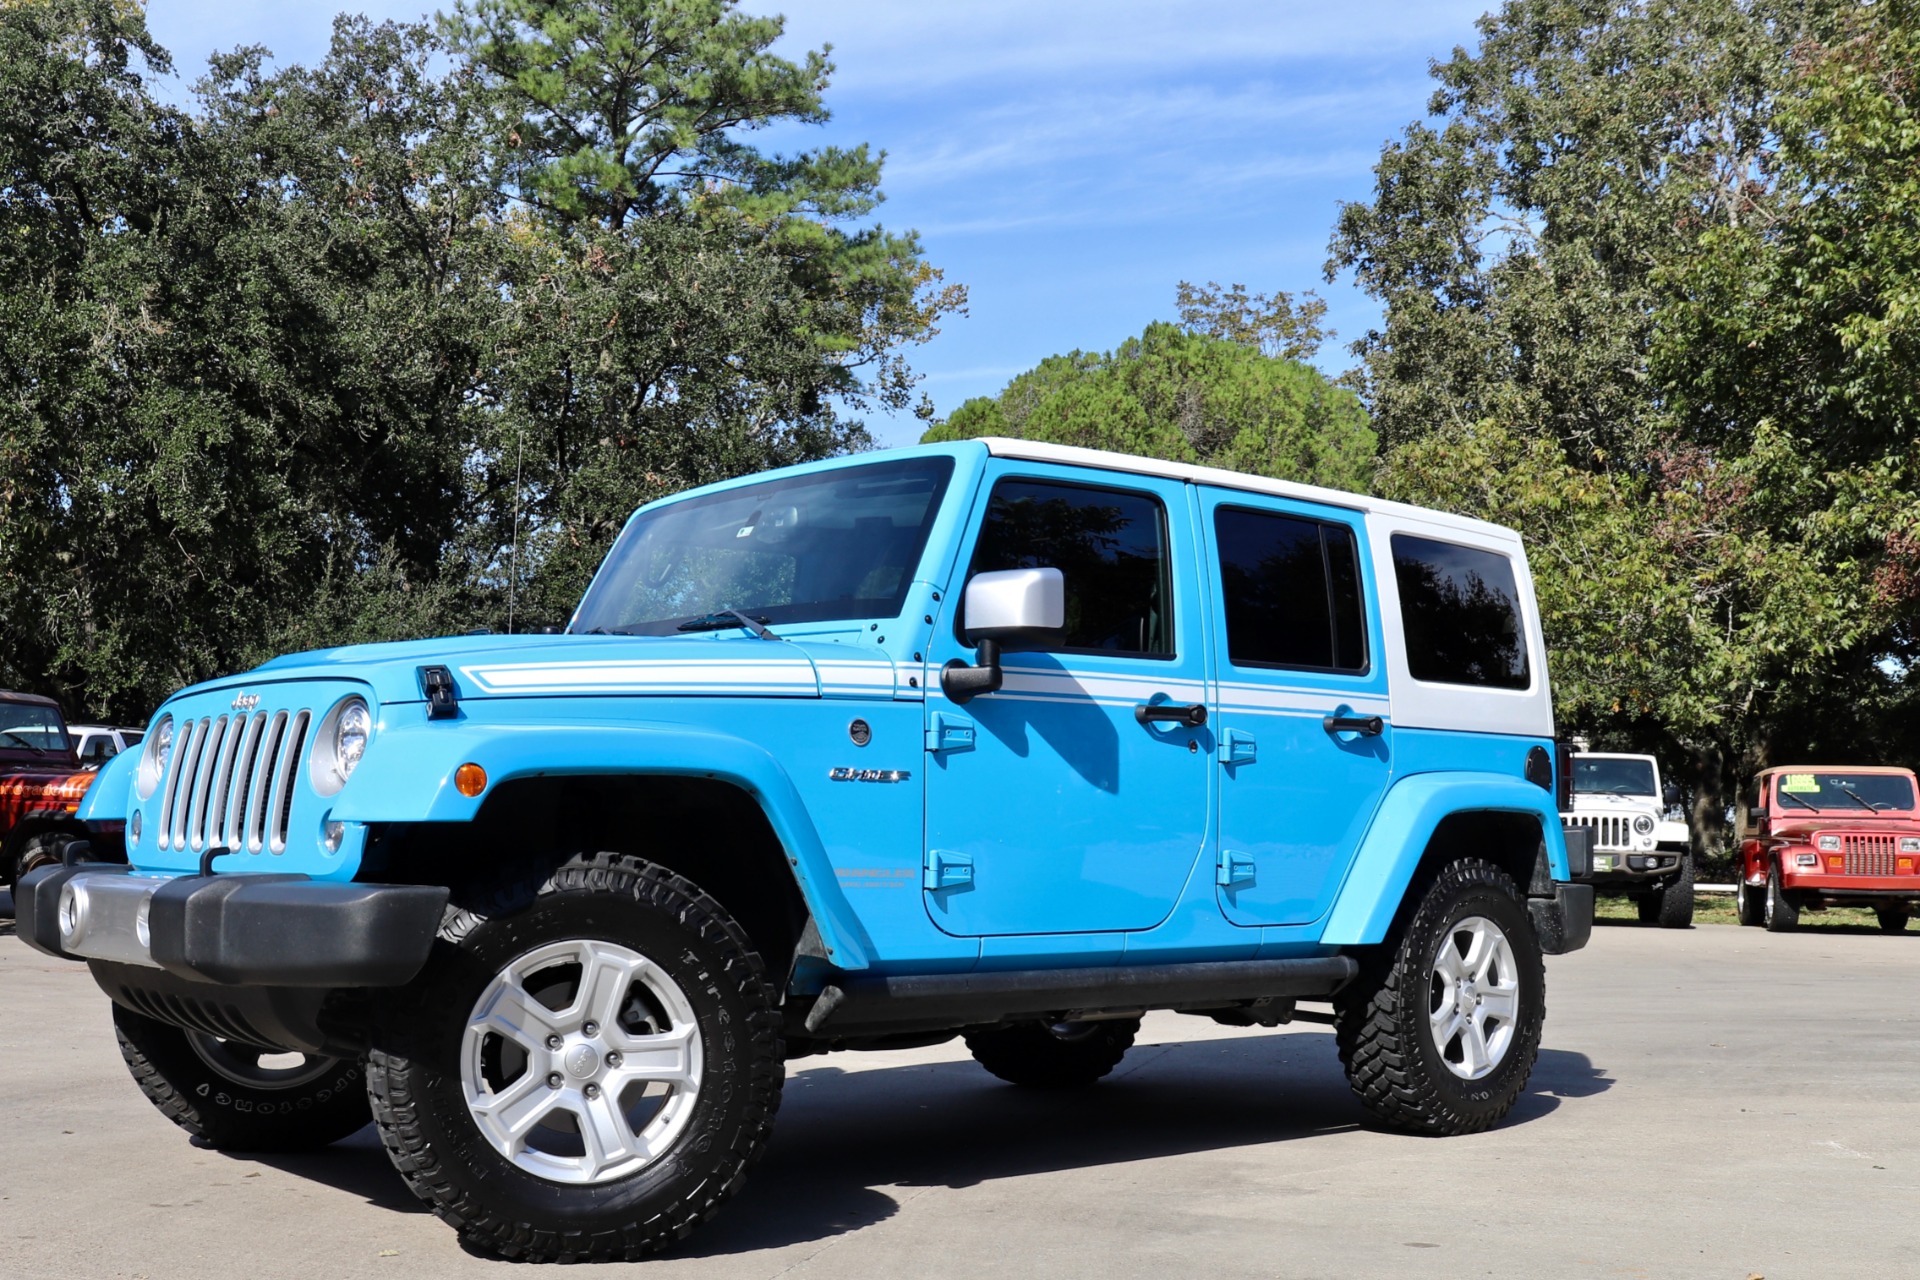 Used-2017-Jeep-Wrangler-Unlimited-Chief-Edition